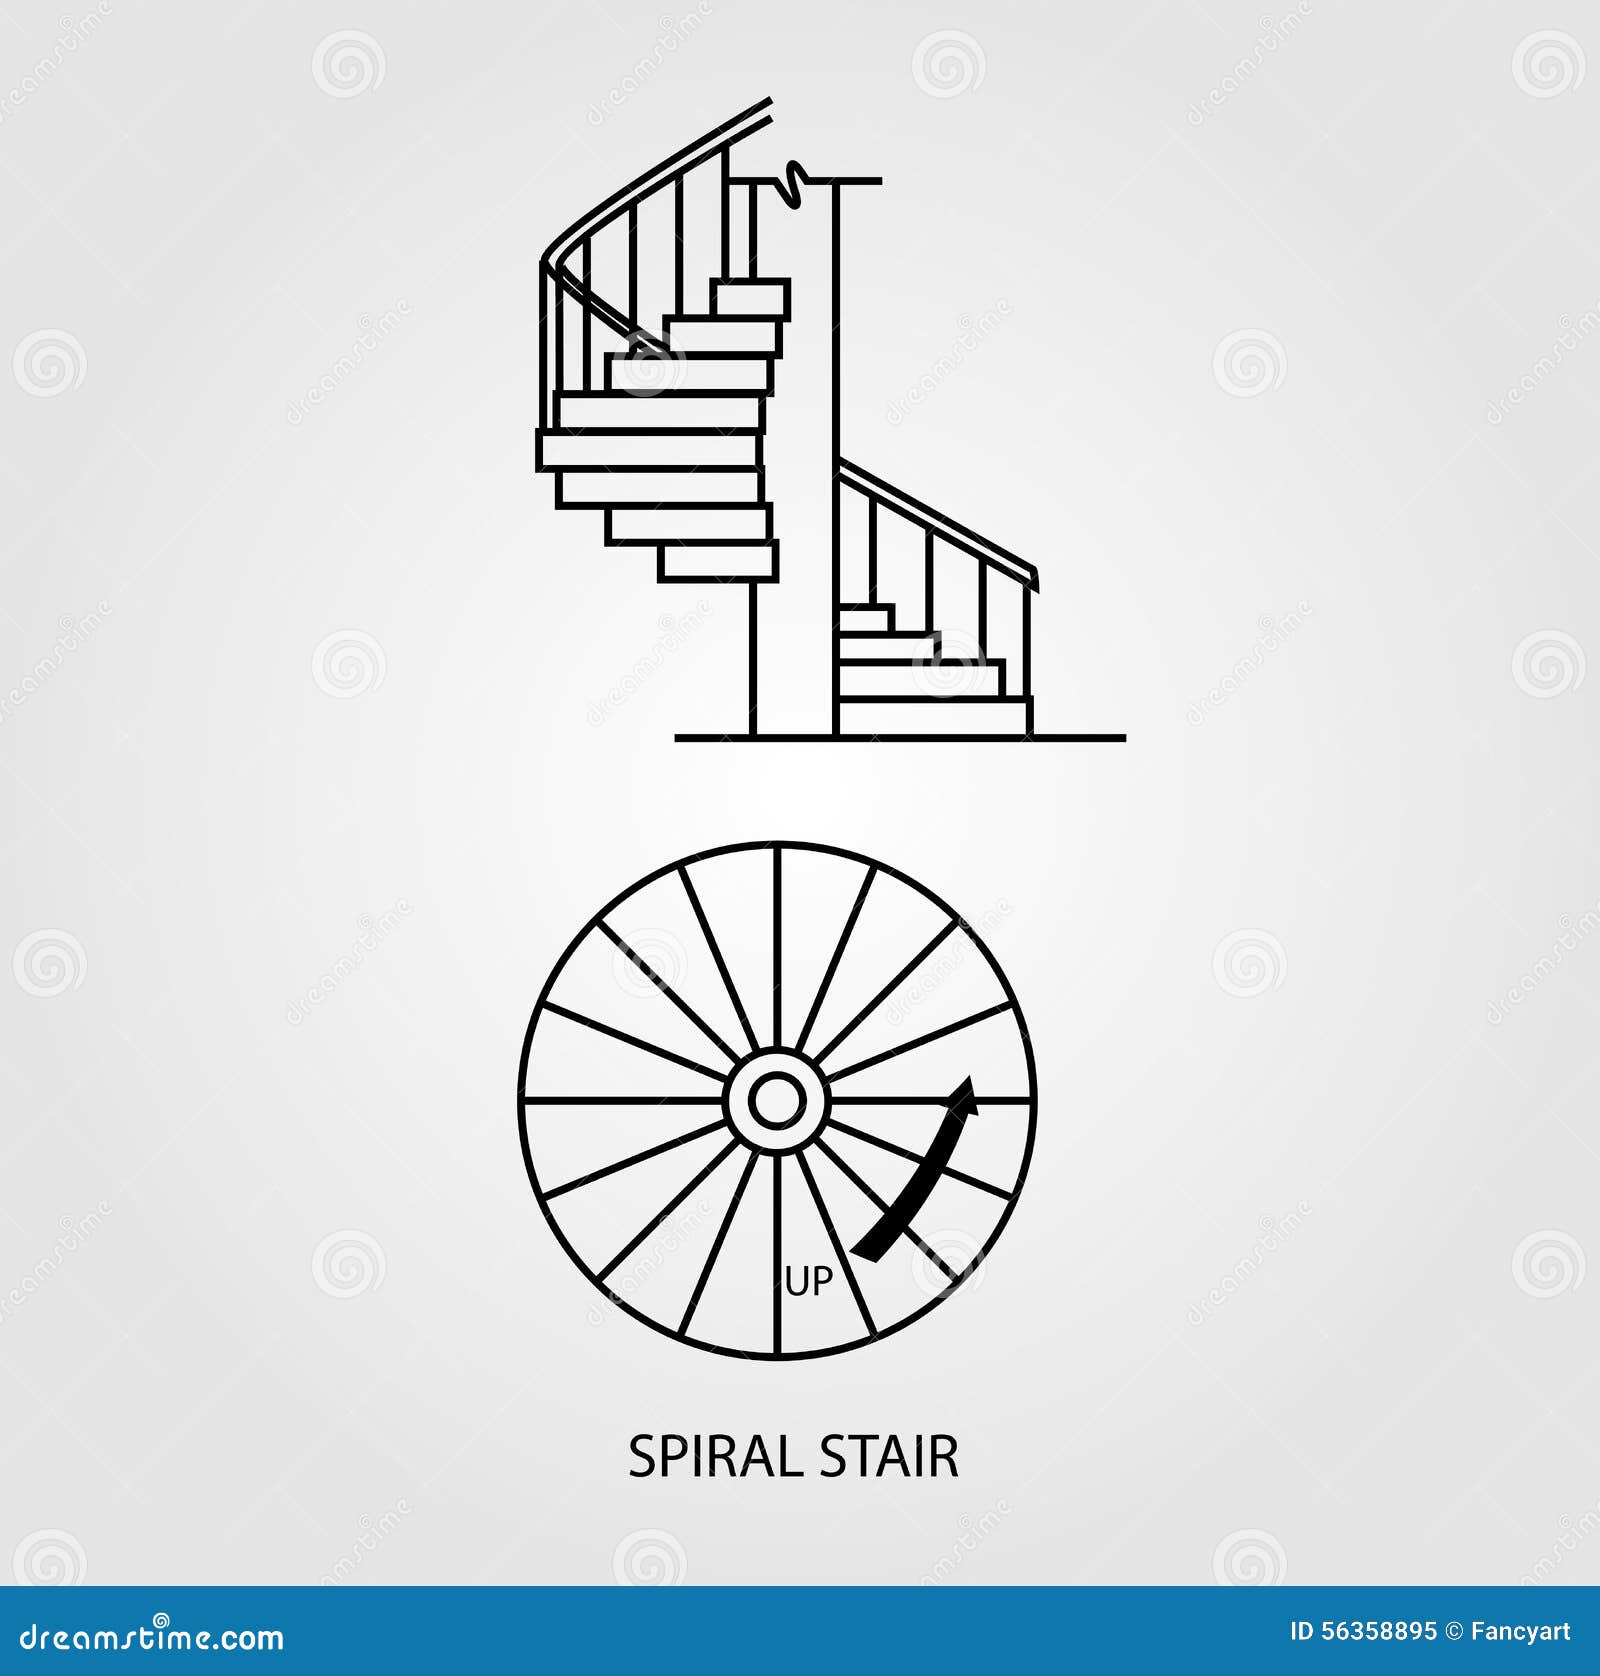 Spiral Stairs Top View Stock Illustrations – 71 Spiral Stairs View Stock Illustrations, Clipart - Dreamstime